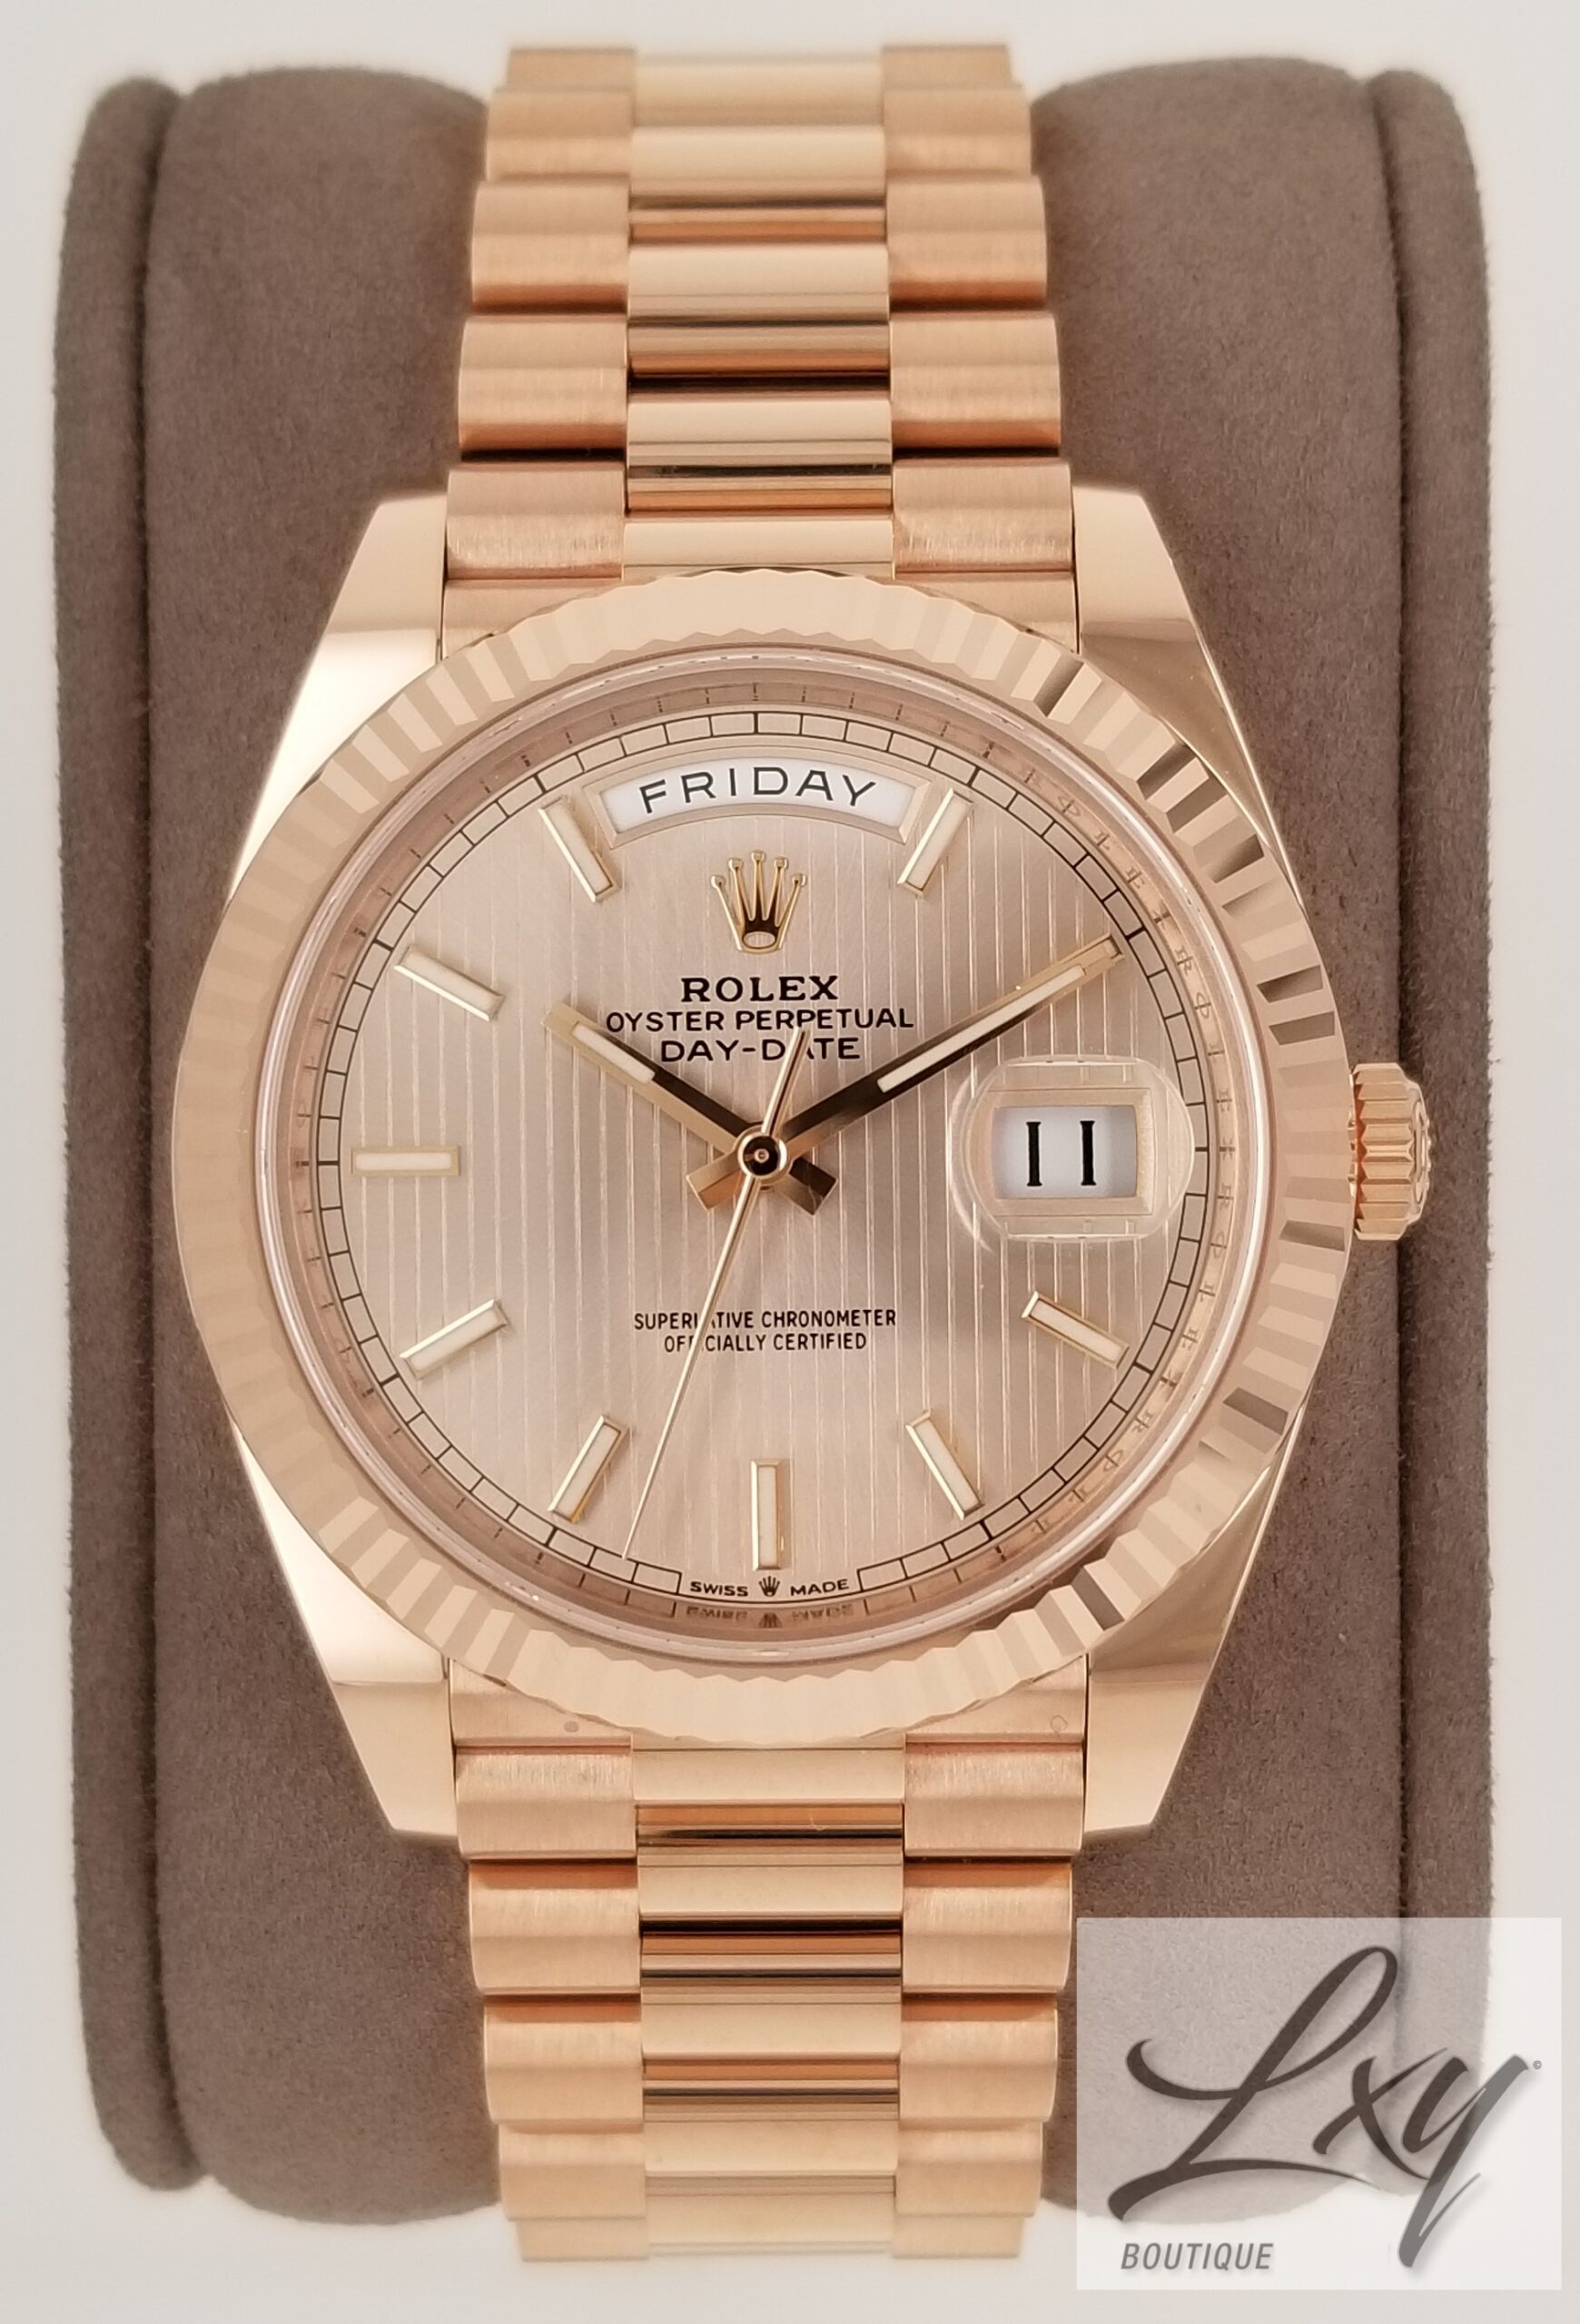 ROLEX DAY-DATE 40MM STRIPE MOTIF EVEROSE GOLD WITH A PRESIDENT BAND - Lxy Boutique